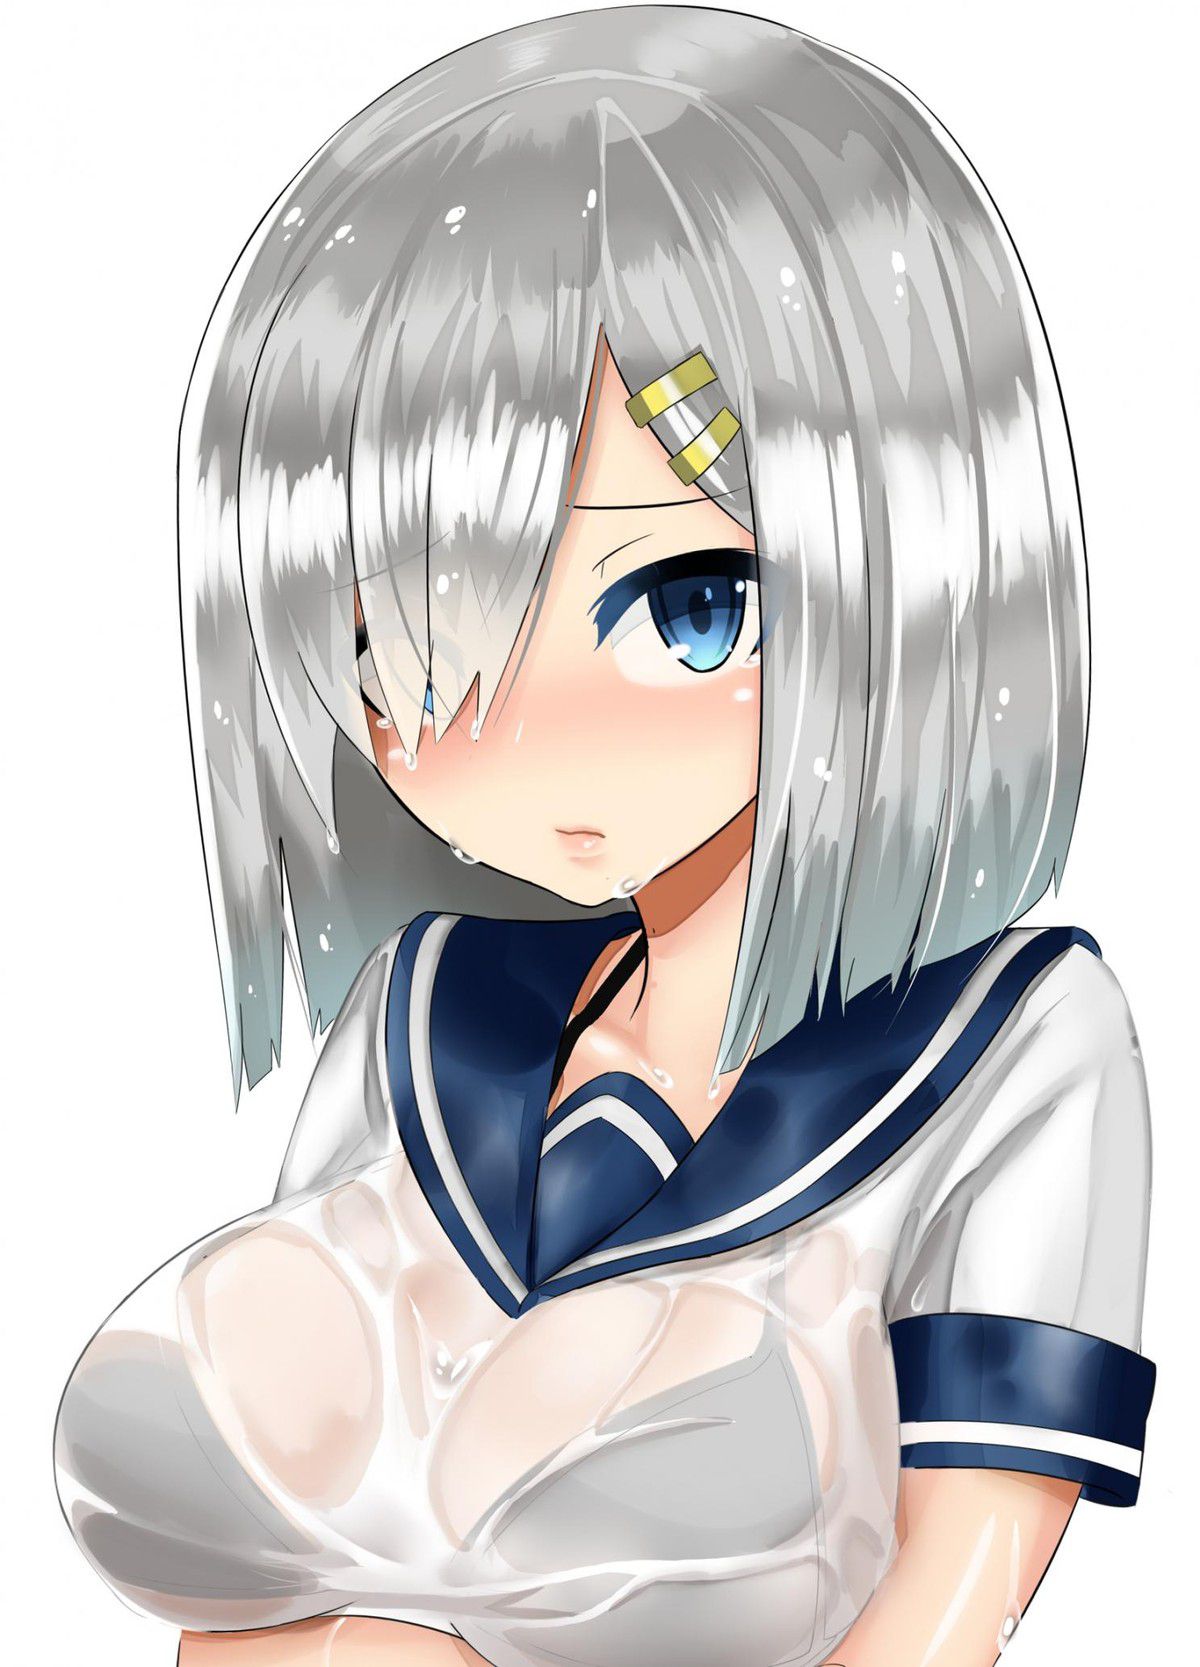 [Image] "ship this ' of warship daughter sexy cuteness is abnormal wwwwwwwwwwww 35